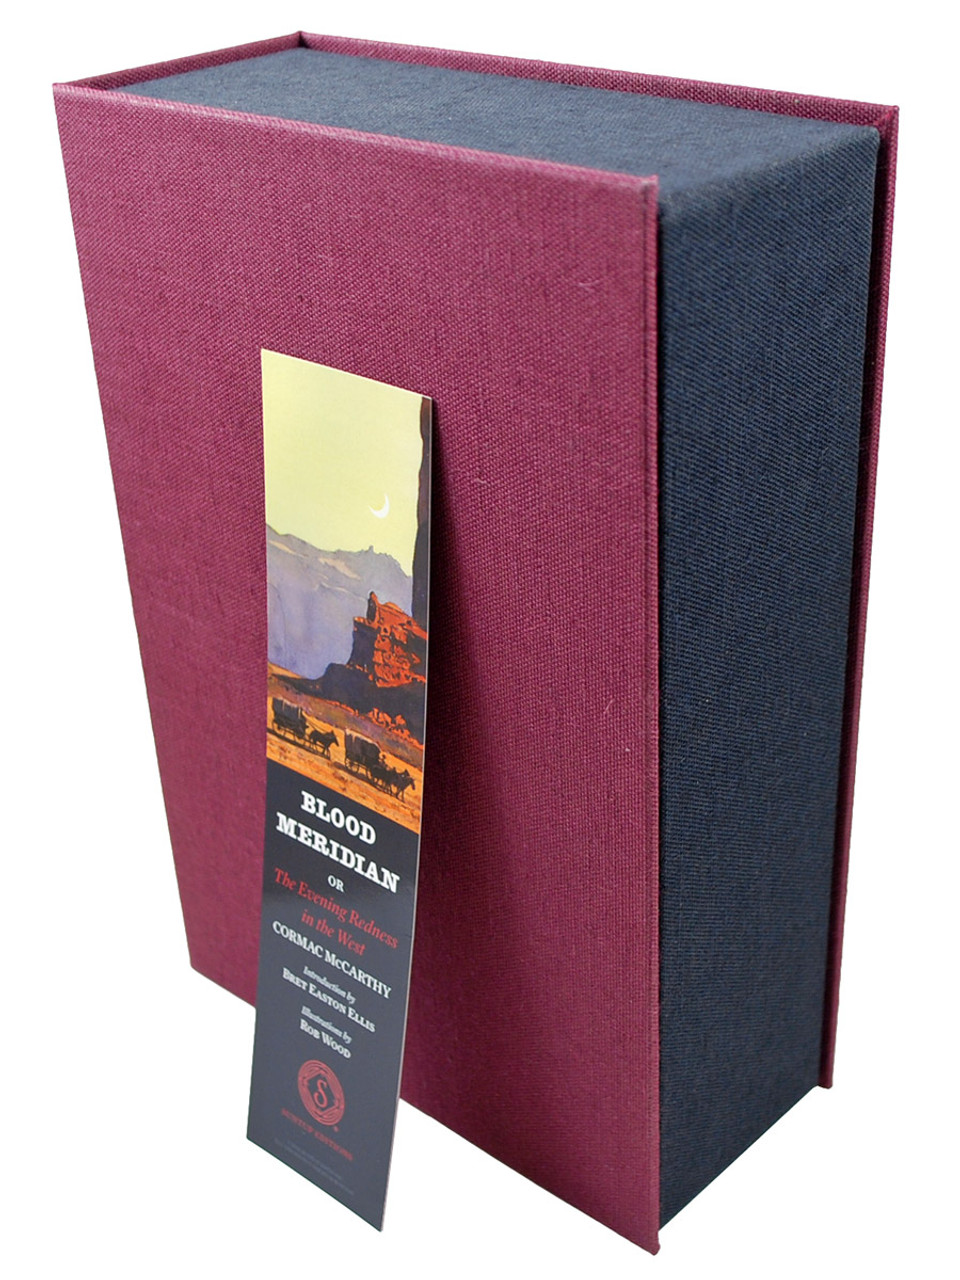 Cormac McCarthy "Blood Meridian" Signed Limited Numbered Edition,  Leather Bound, No. 90 of 350 Tray-cased [Very Fine]